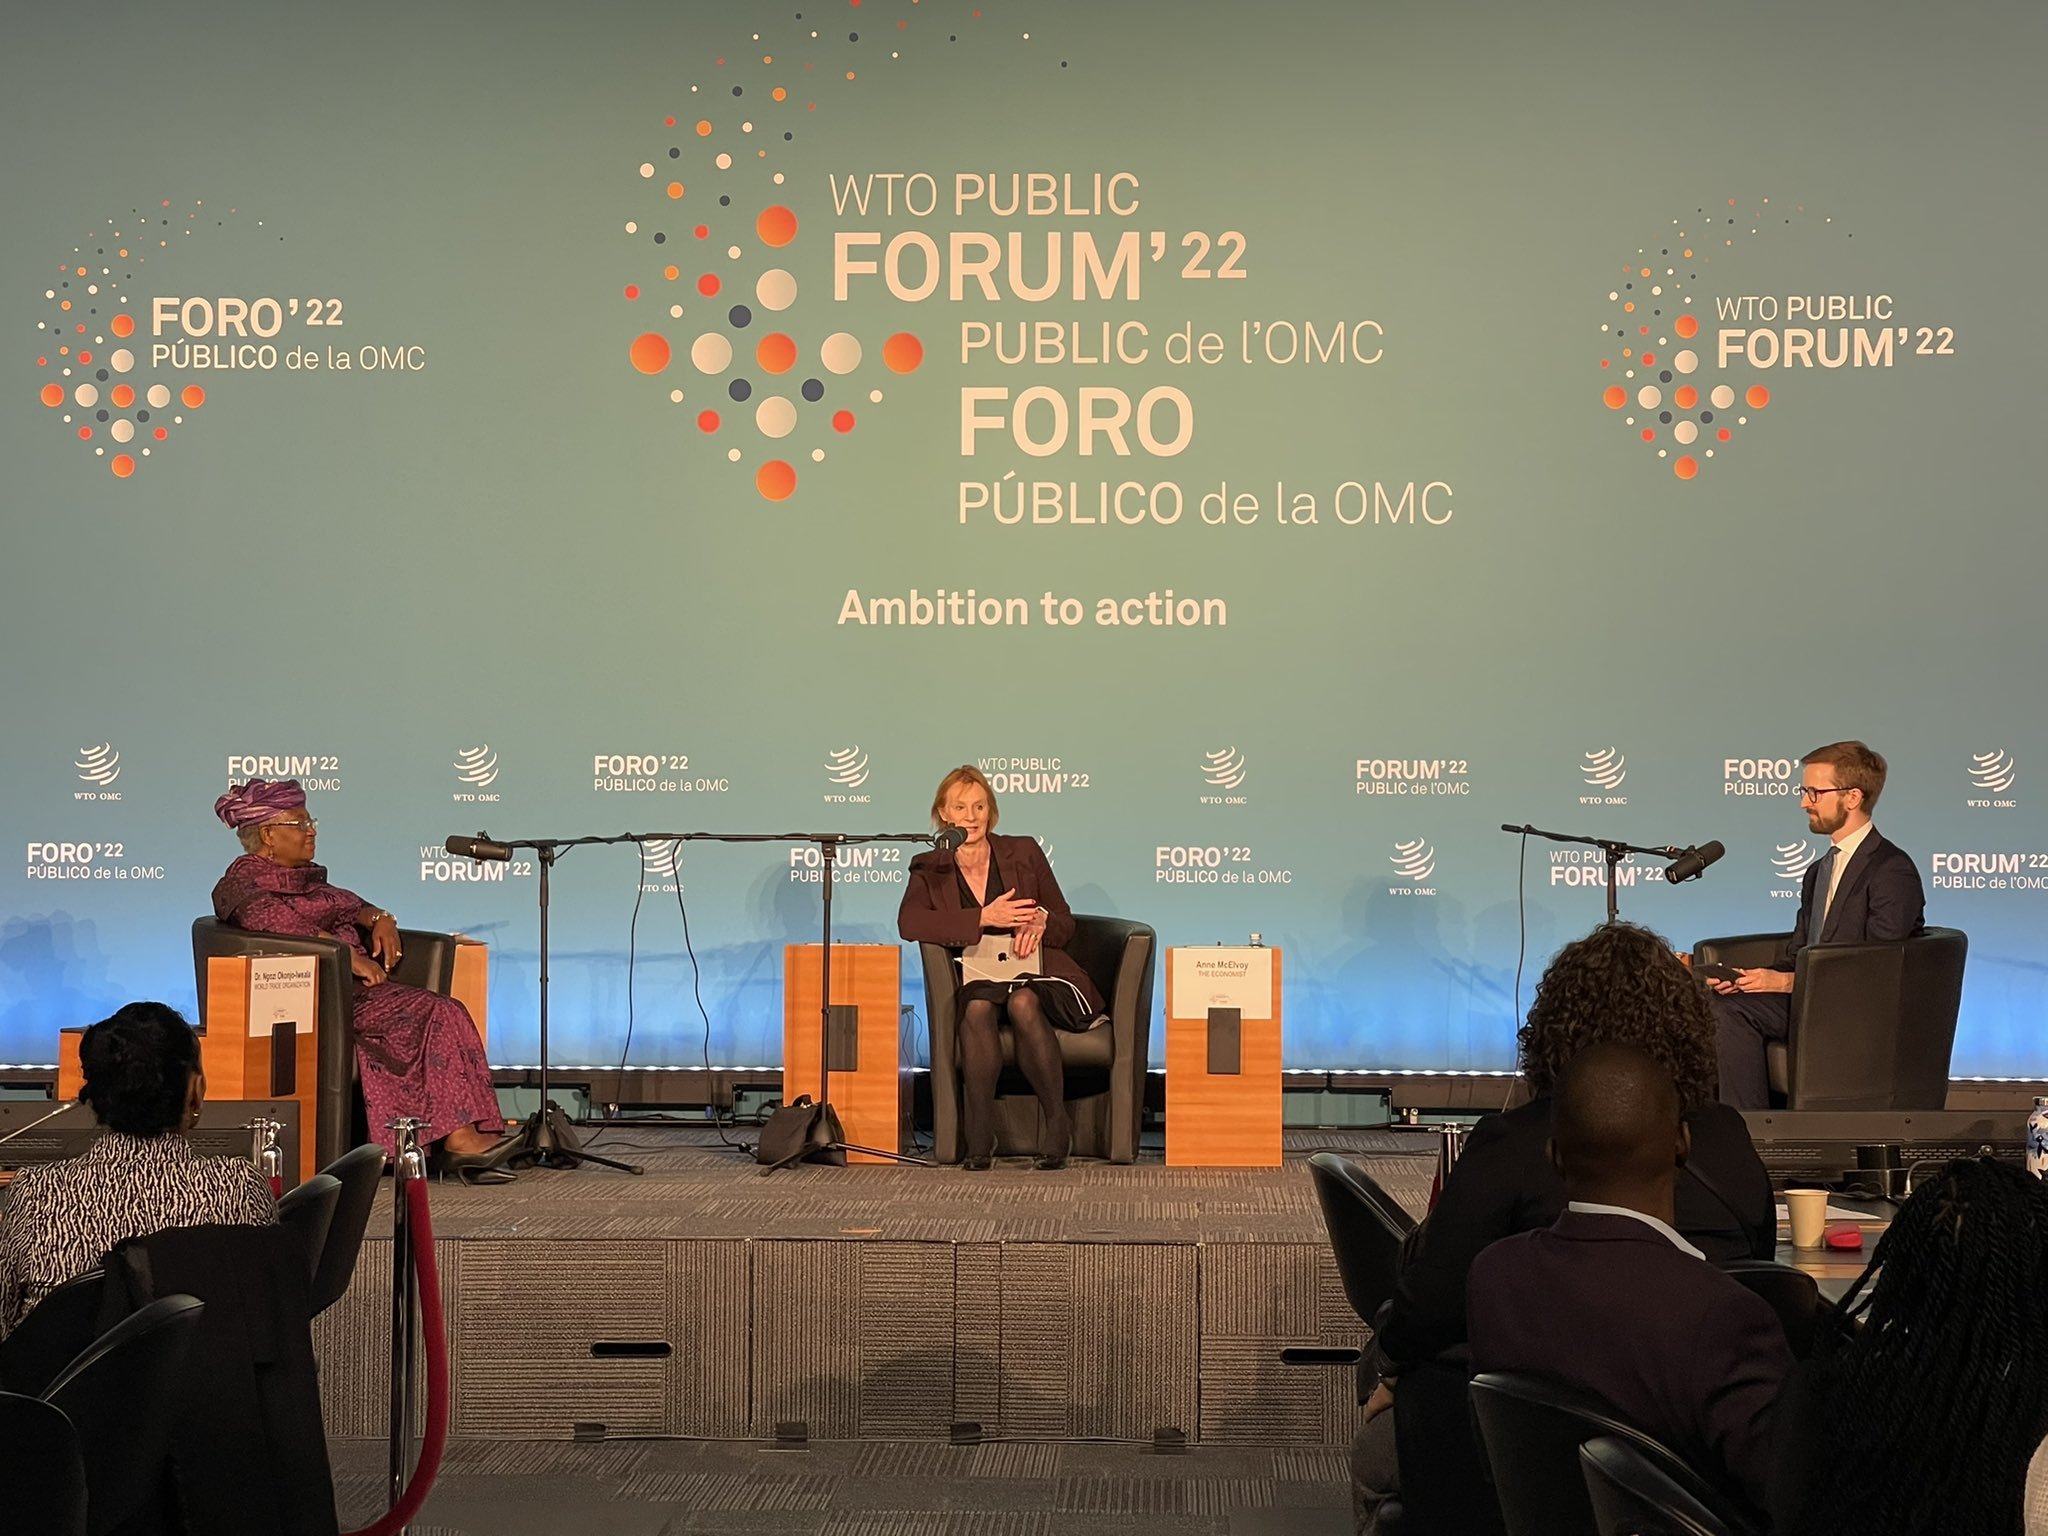  On stage with Ngozi Okonjo-Iweala, Director-General of the WTO 